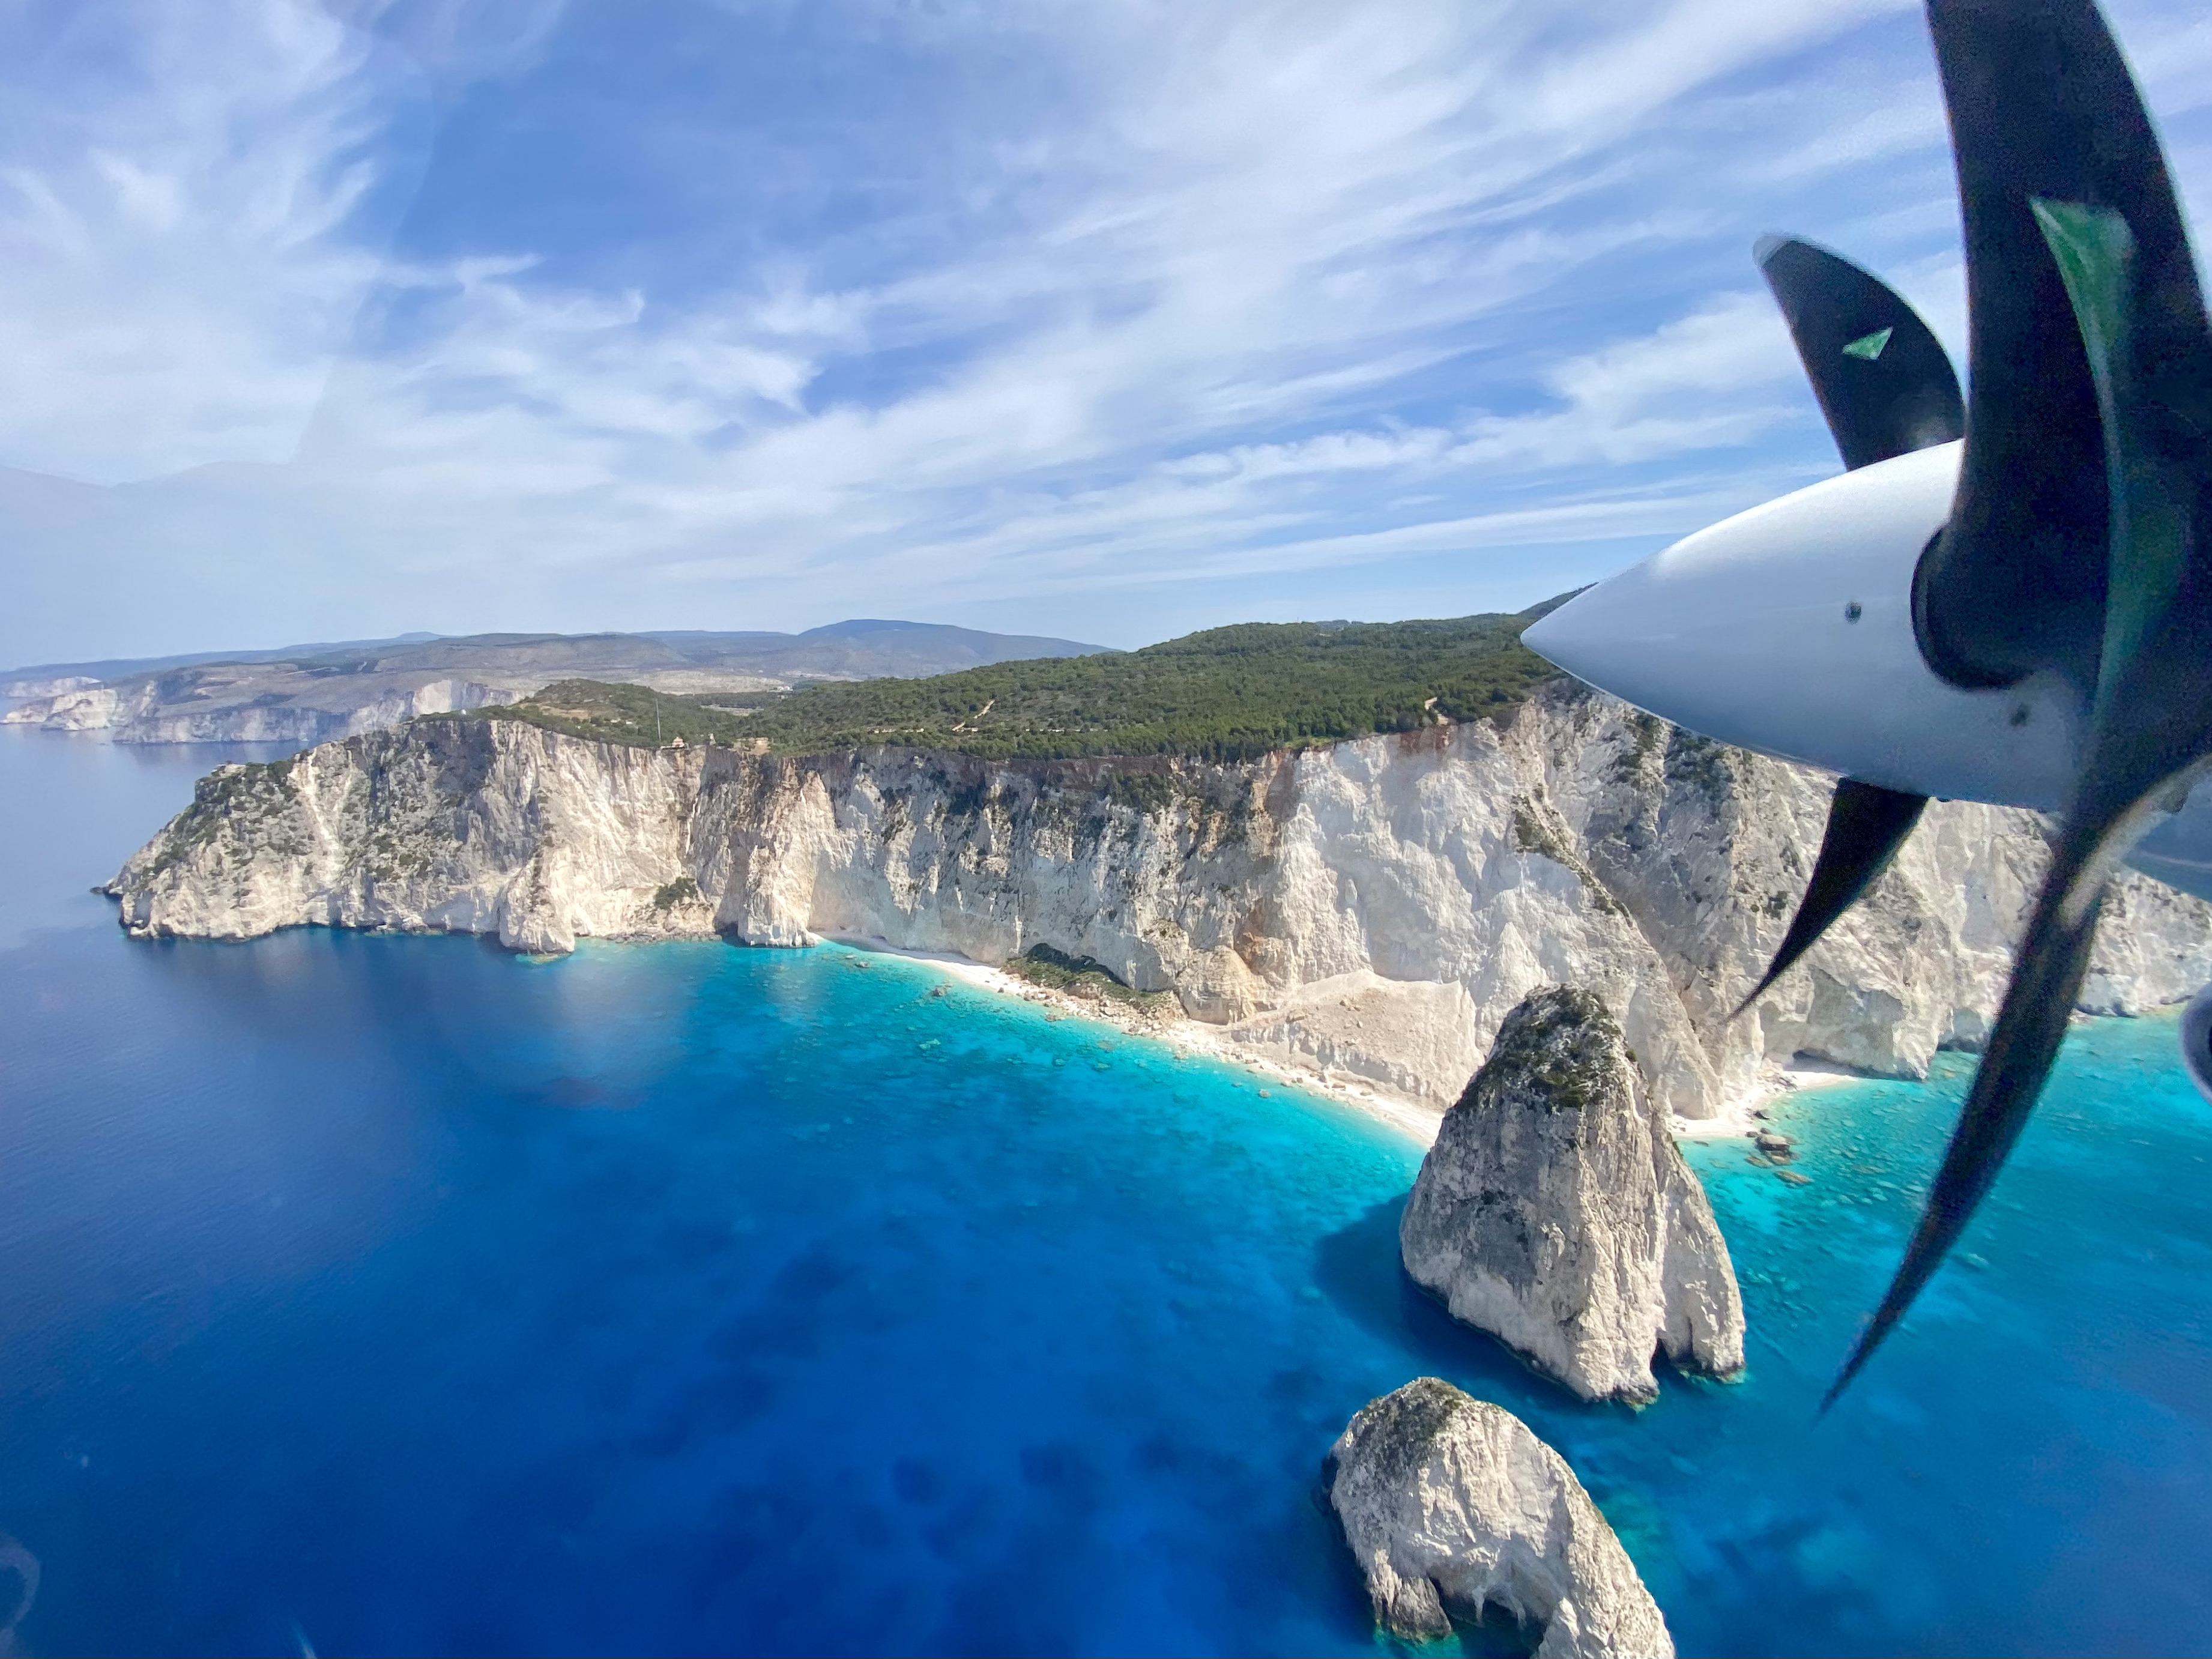 Ionian coast seen from the cockpit of a Britten Norman Islander with a spinning propeller at the right edge of the frame